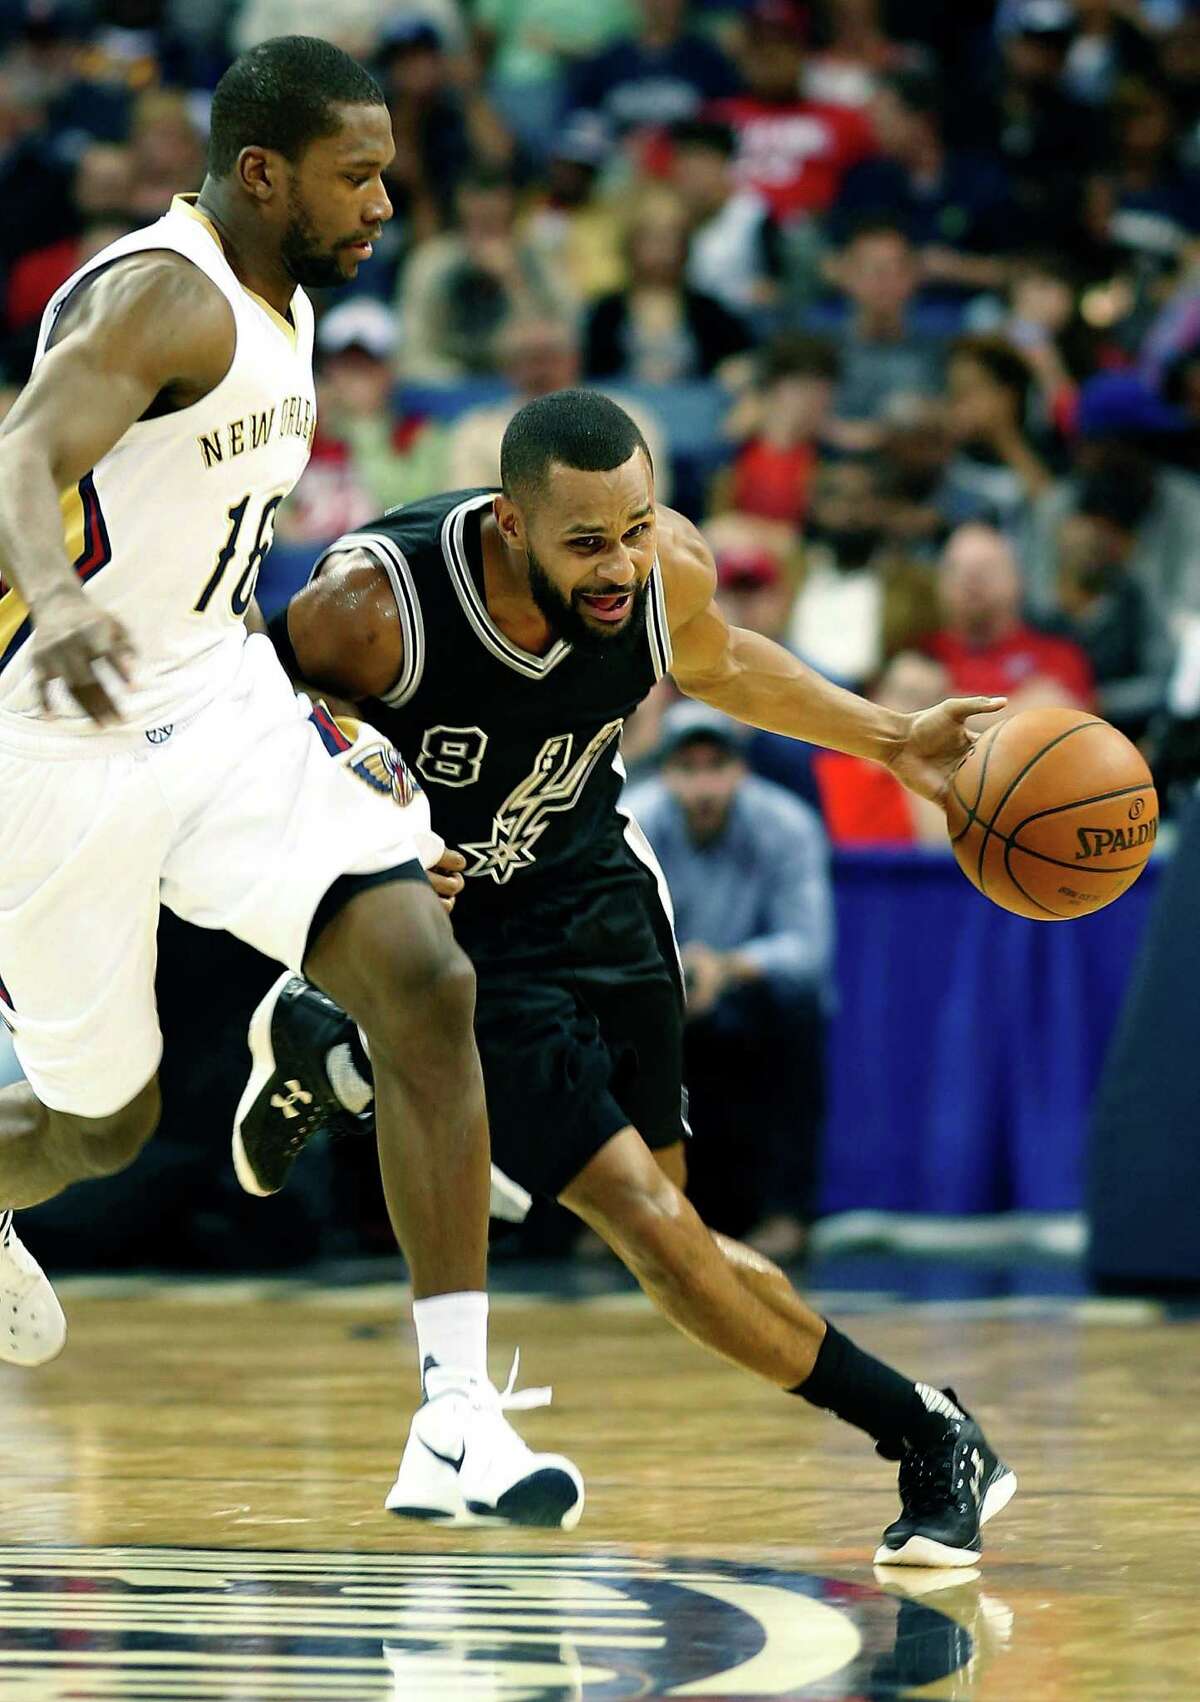 Spurs guard Patty Mills drives past New Orleans Pelicans guard Toney Douglas, left, in the second half in New Orleans on March 3, 2016.